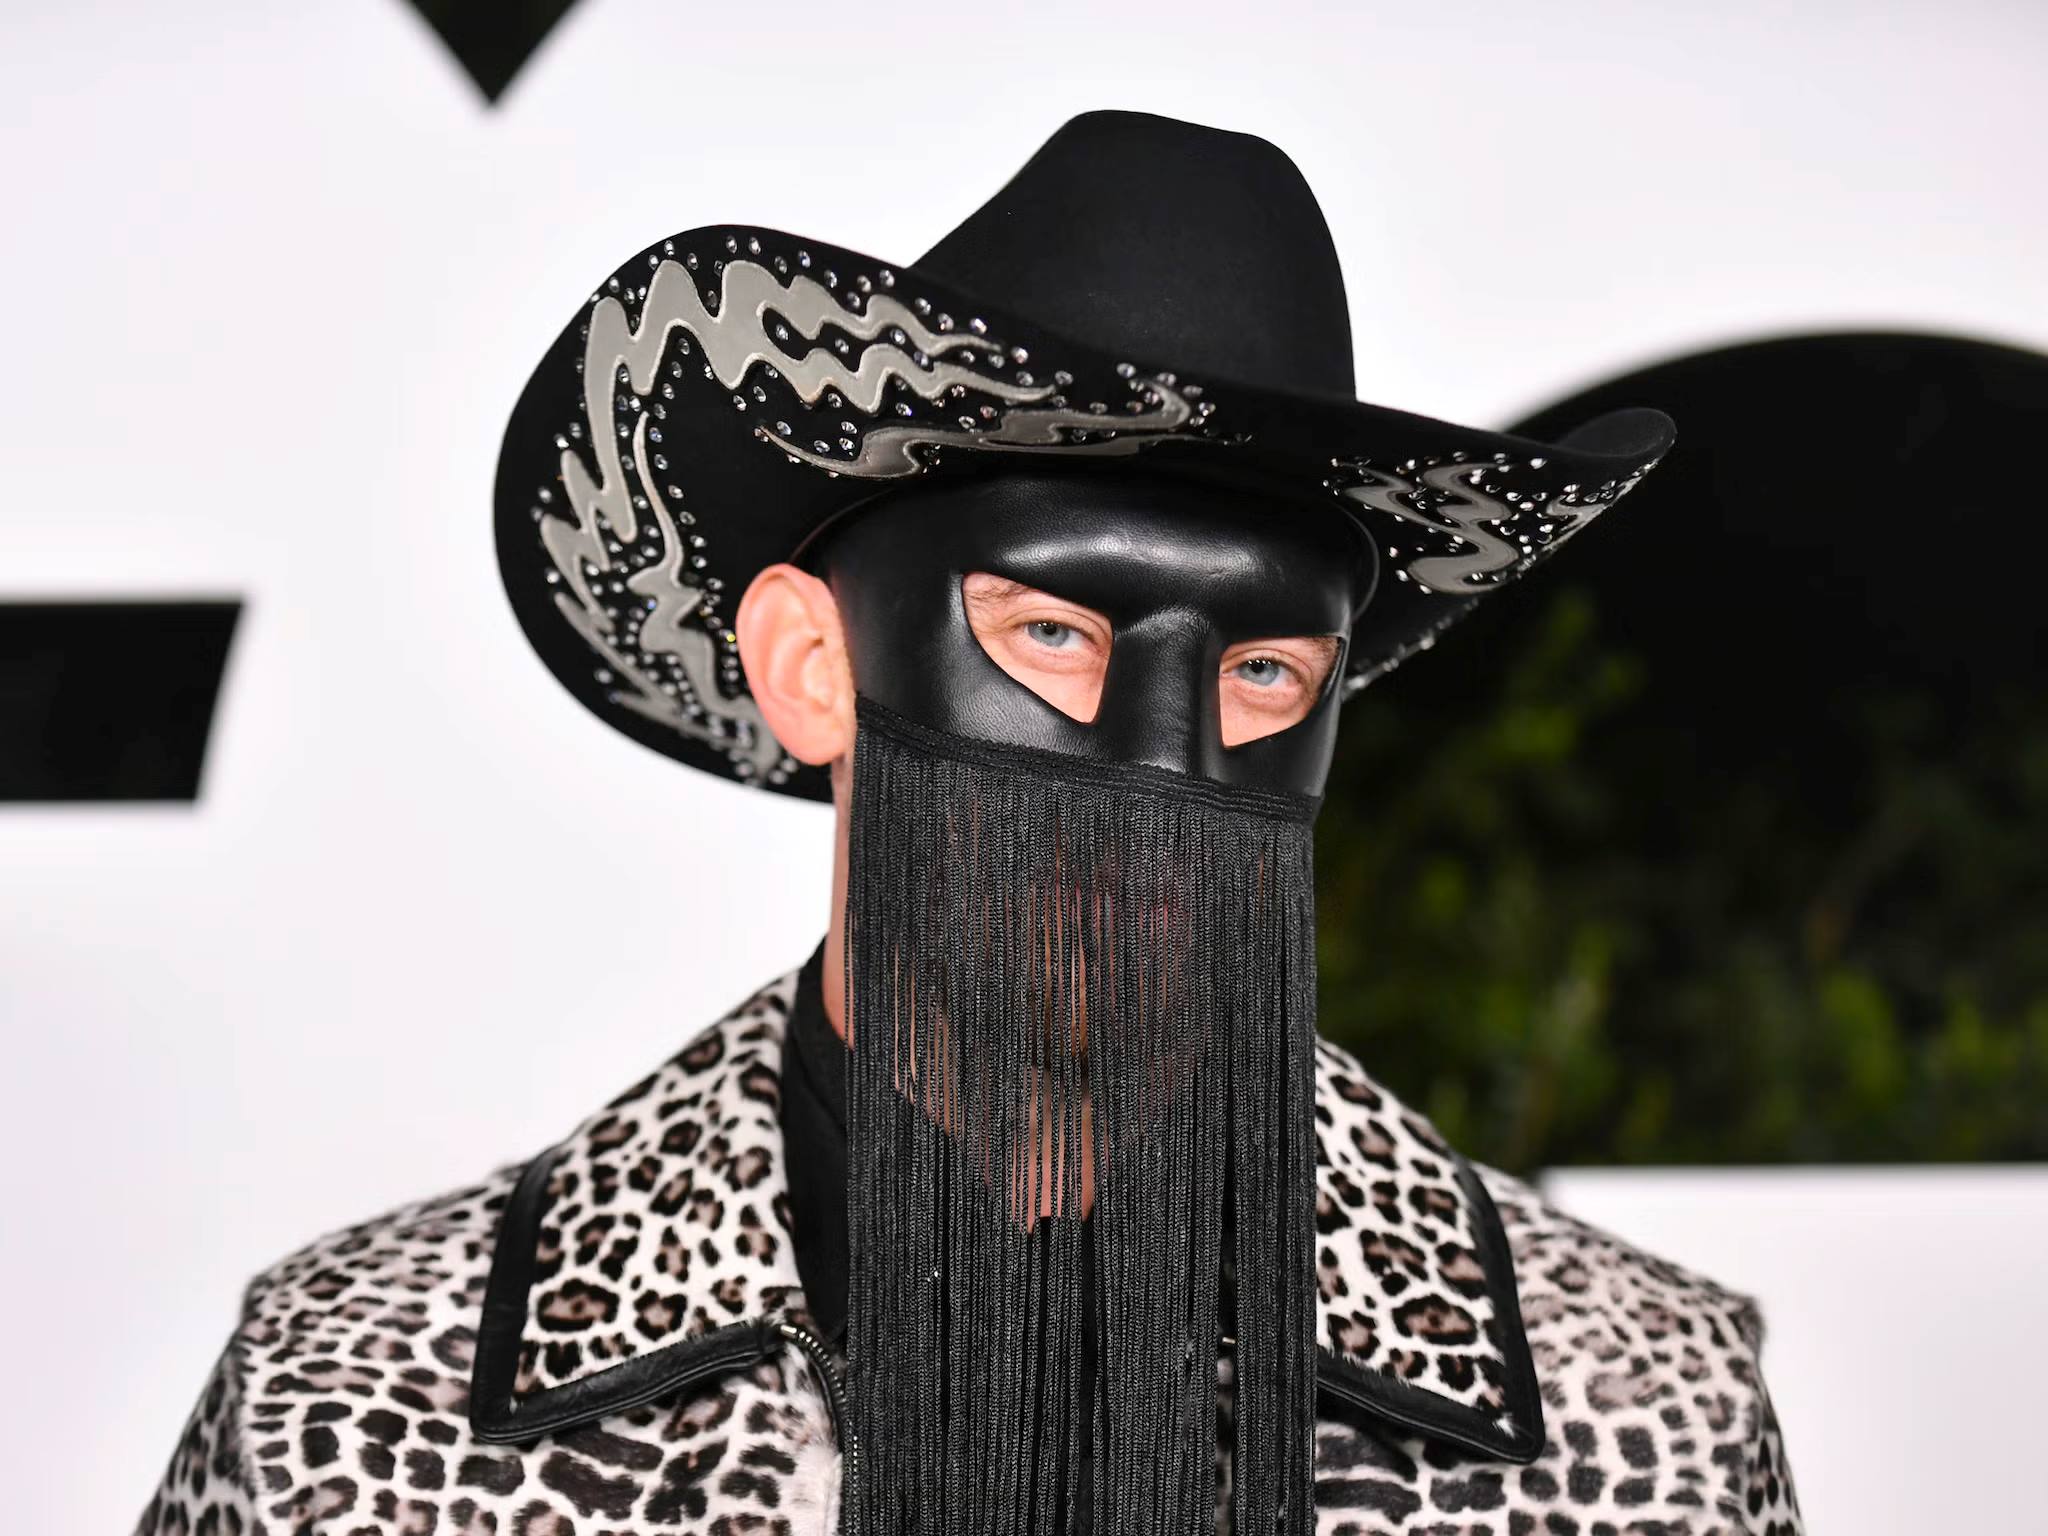 Country Musician Who Wears A Mask